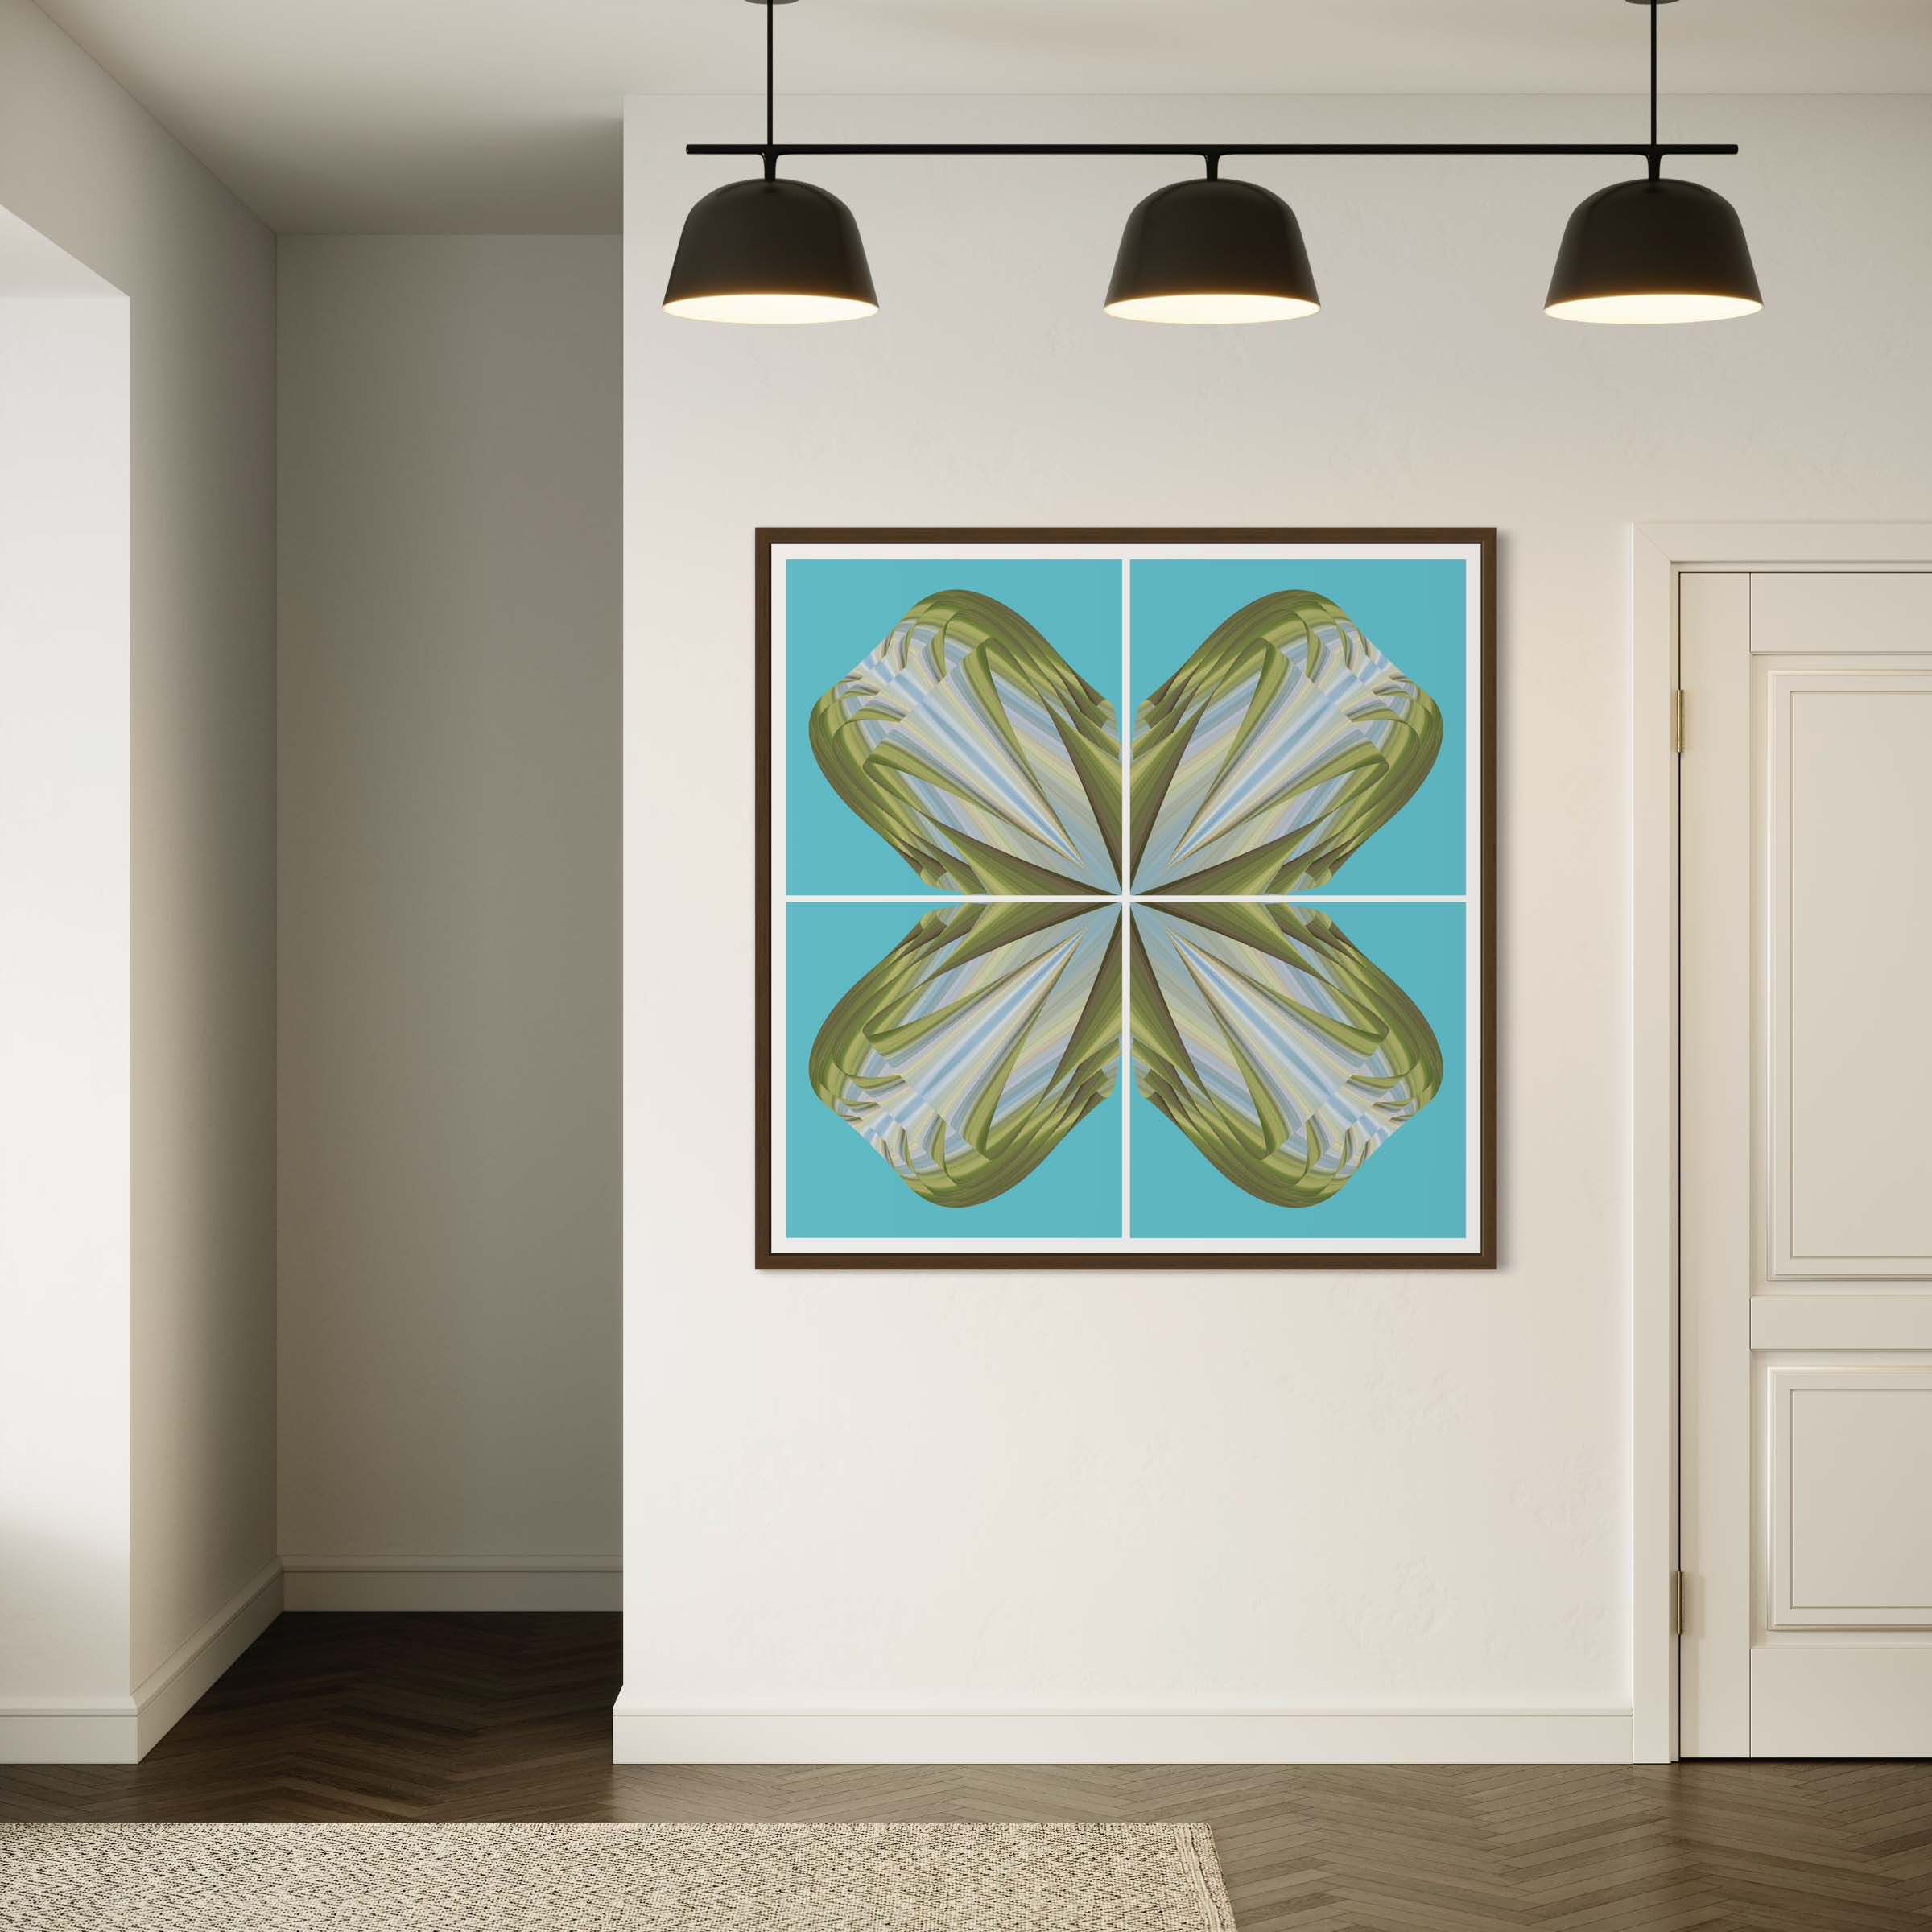 A painting of a flower in the middle of a room.